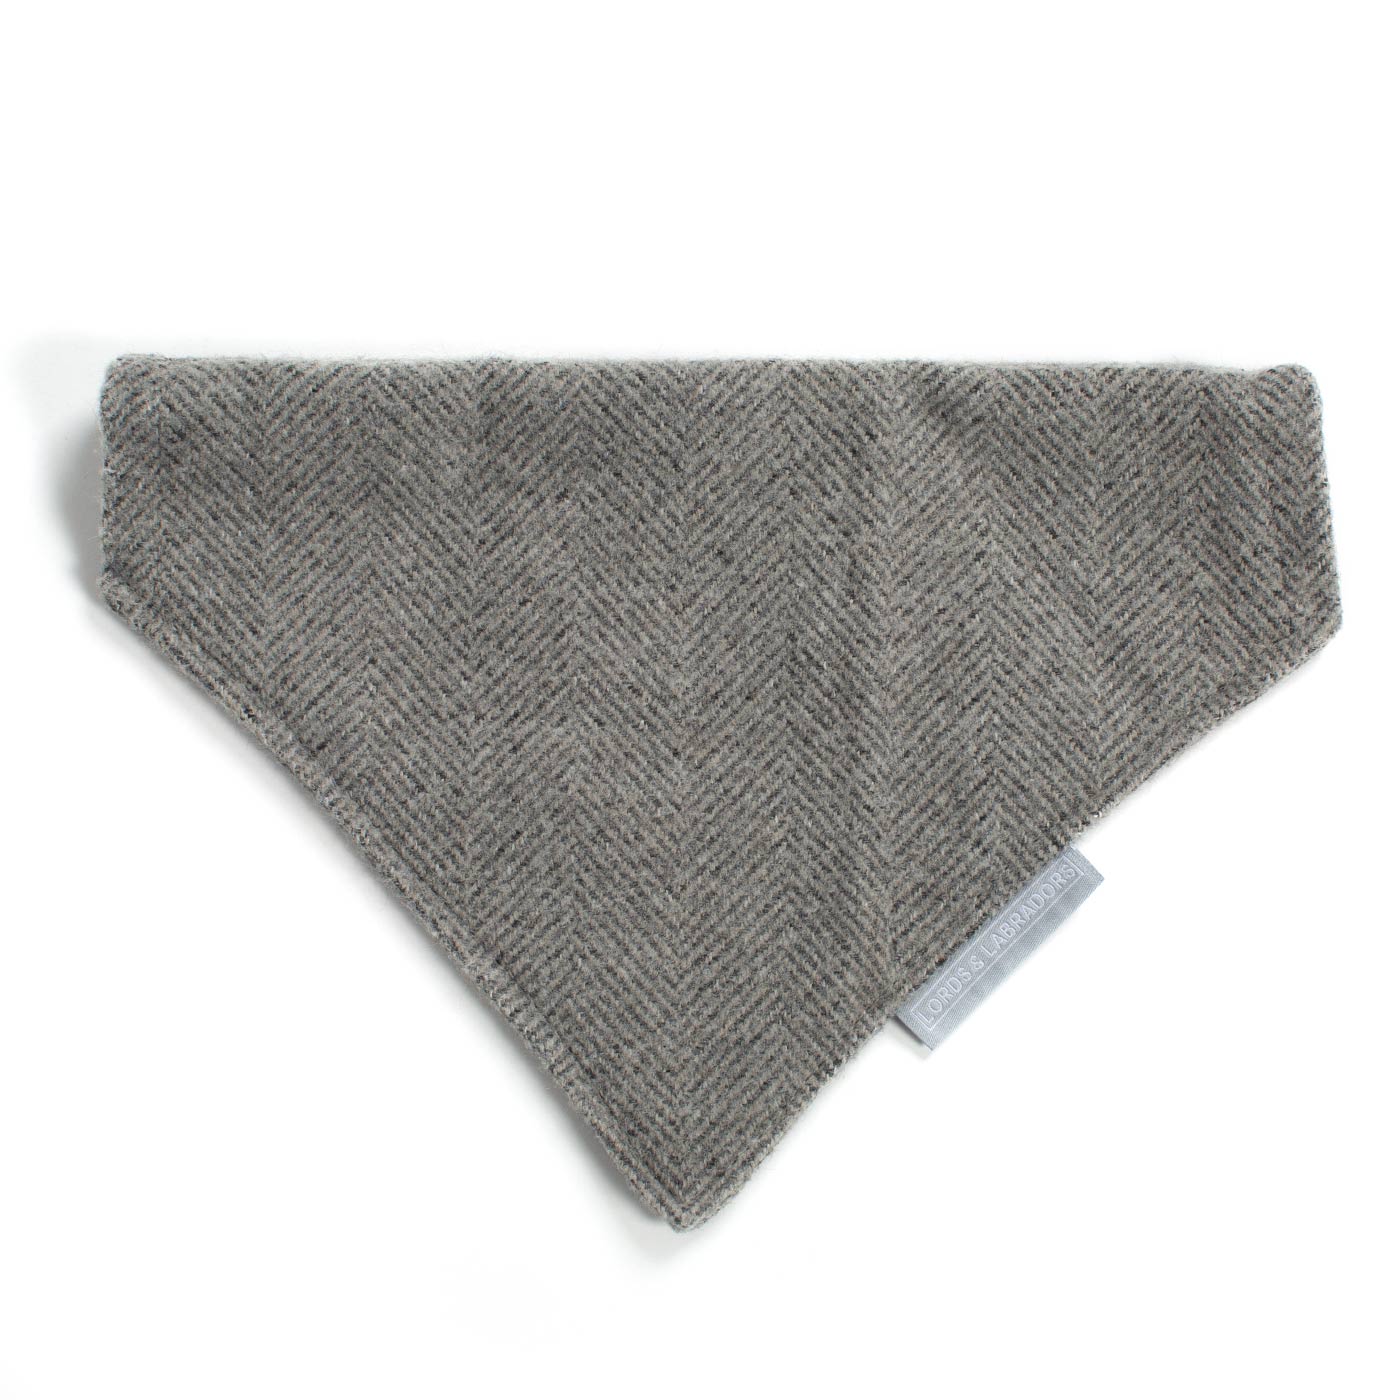 [color:pewter herringbone] Discover The Perfect Bandana For Dogs, Handmade With love In Luxury Herringbone Tweed, Available In 3 Sizes To Personalize Now at Lords & Labradors US